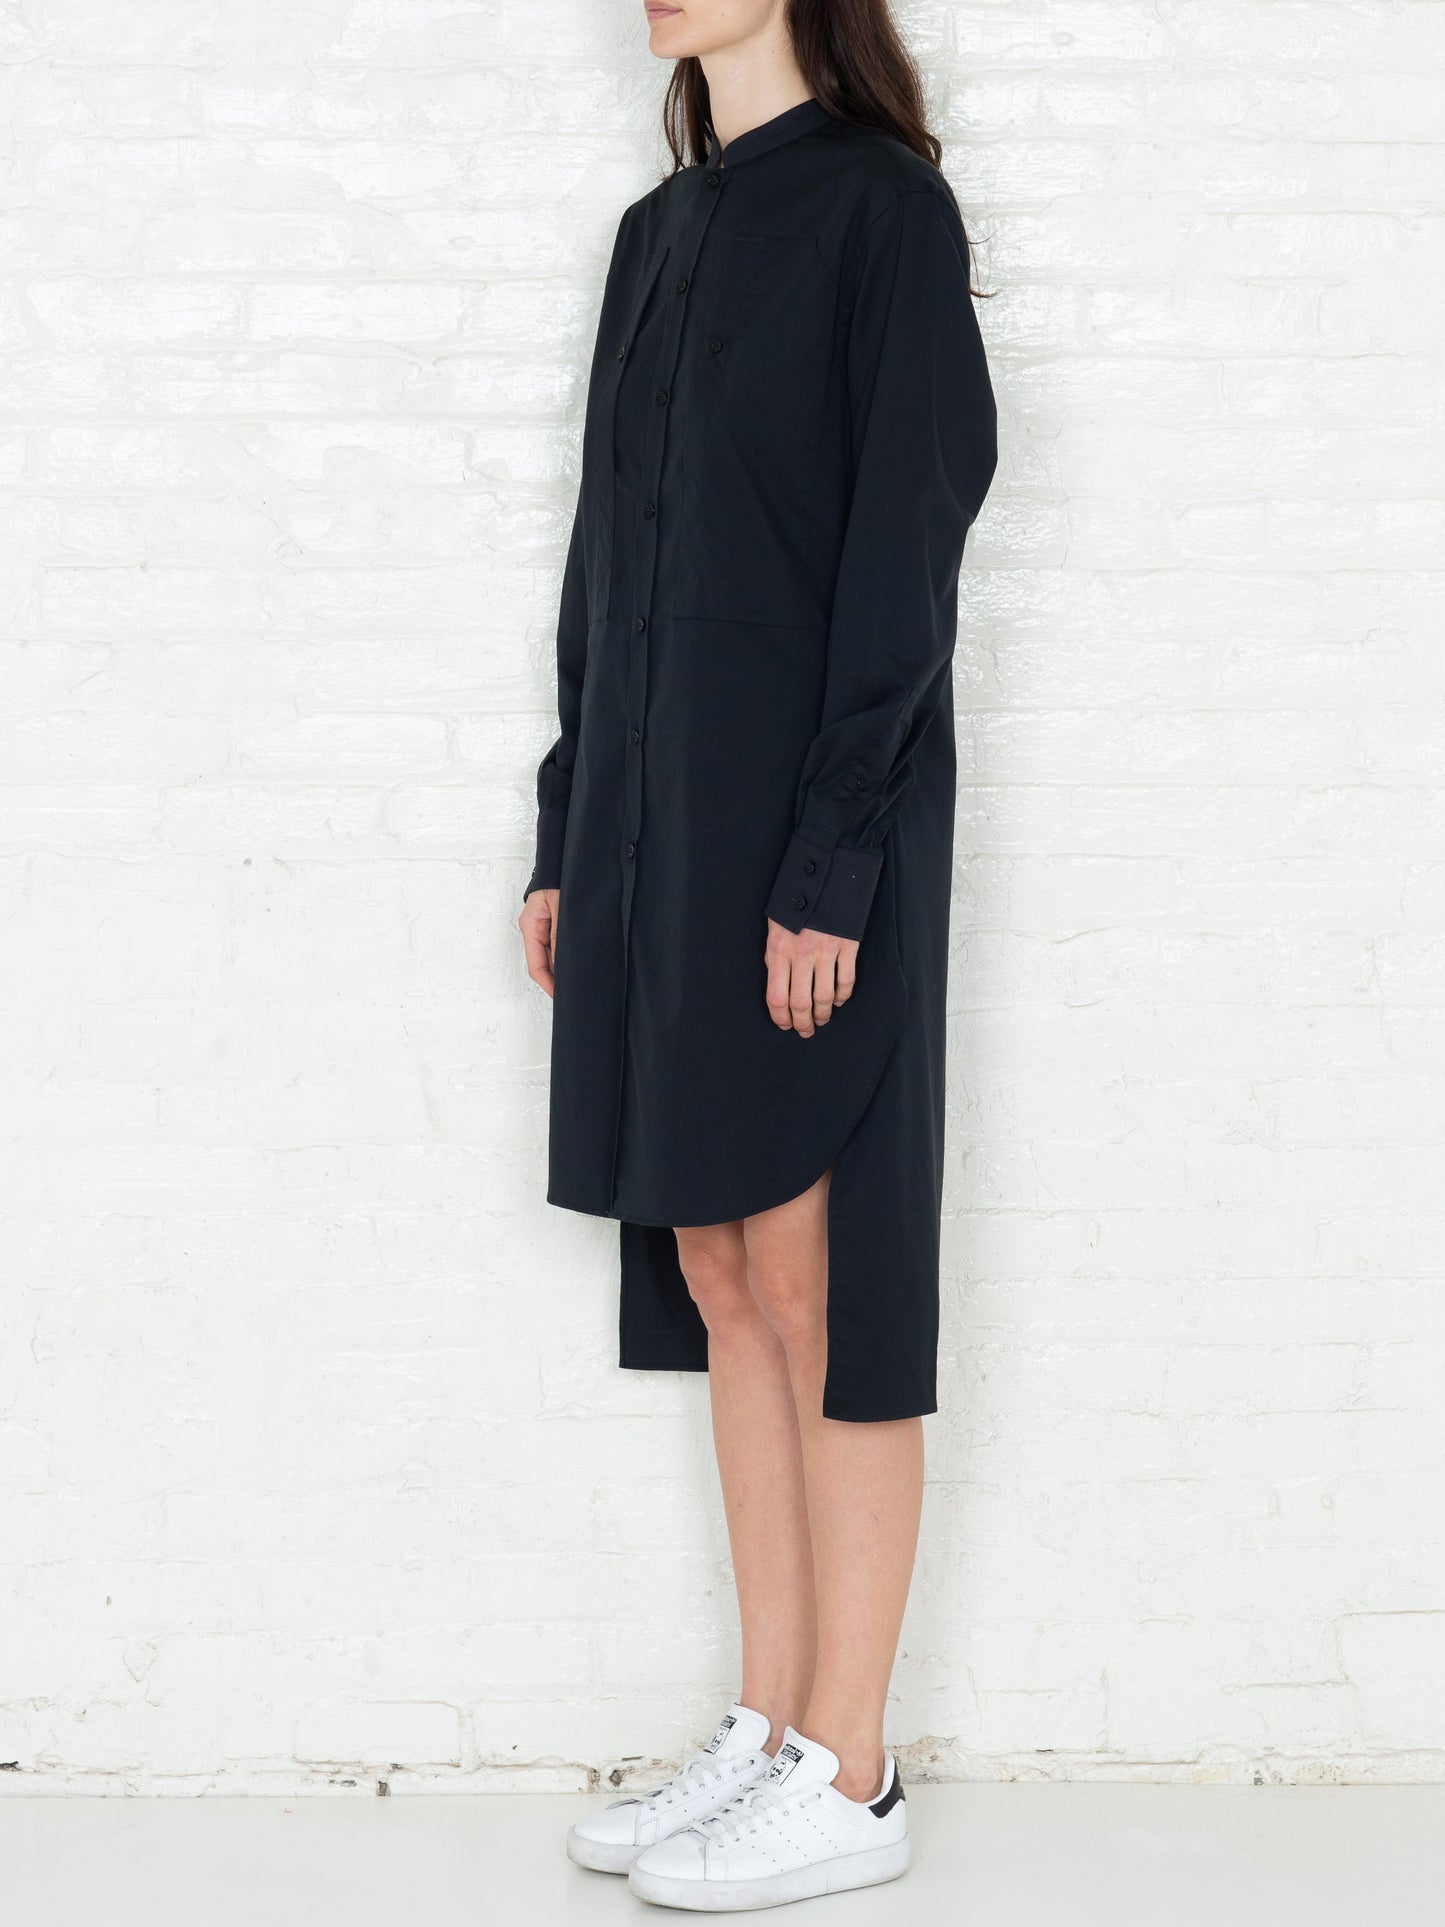 "The Essential" Long Tunic Shirt in Black